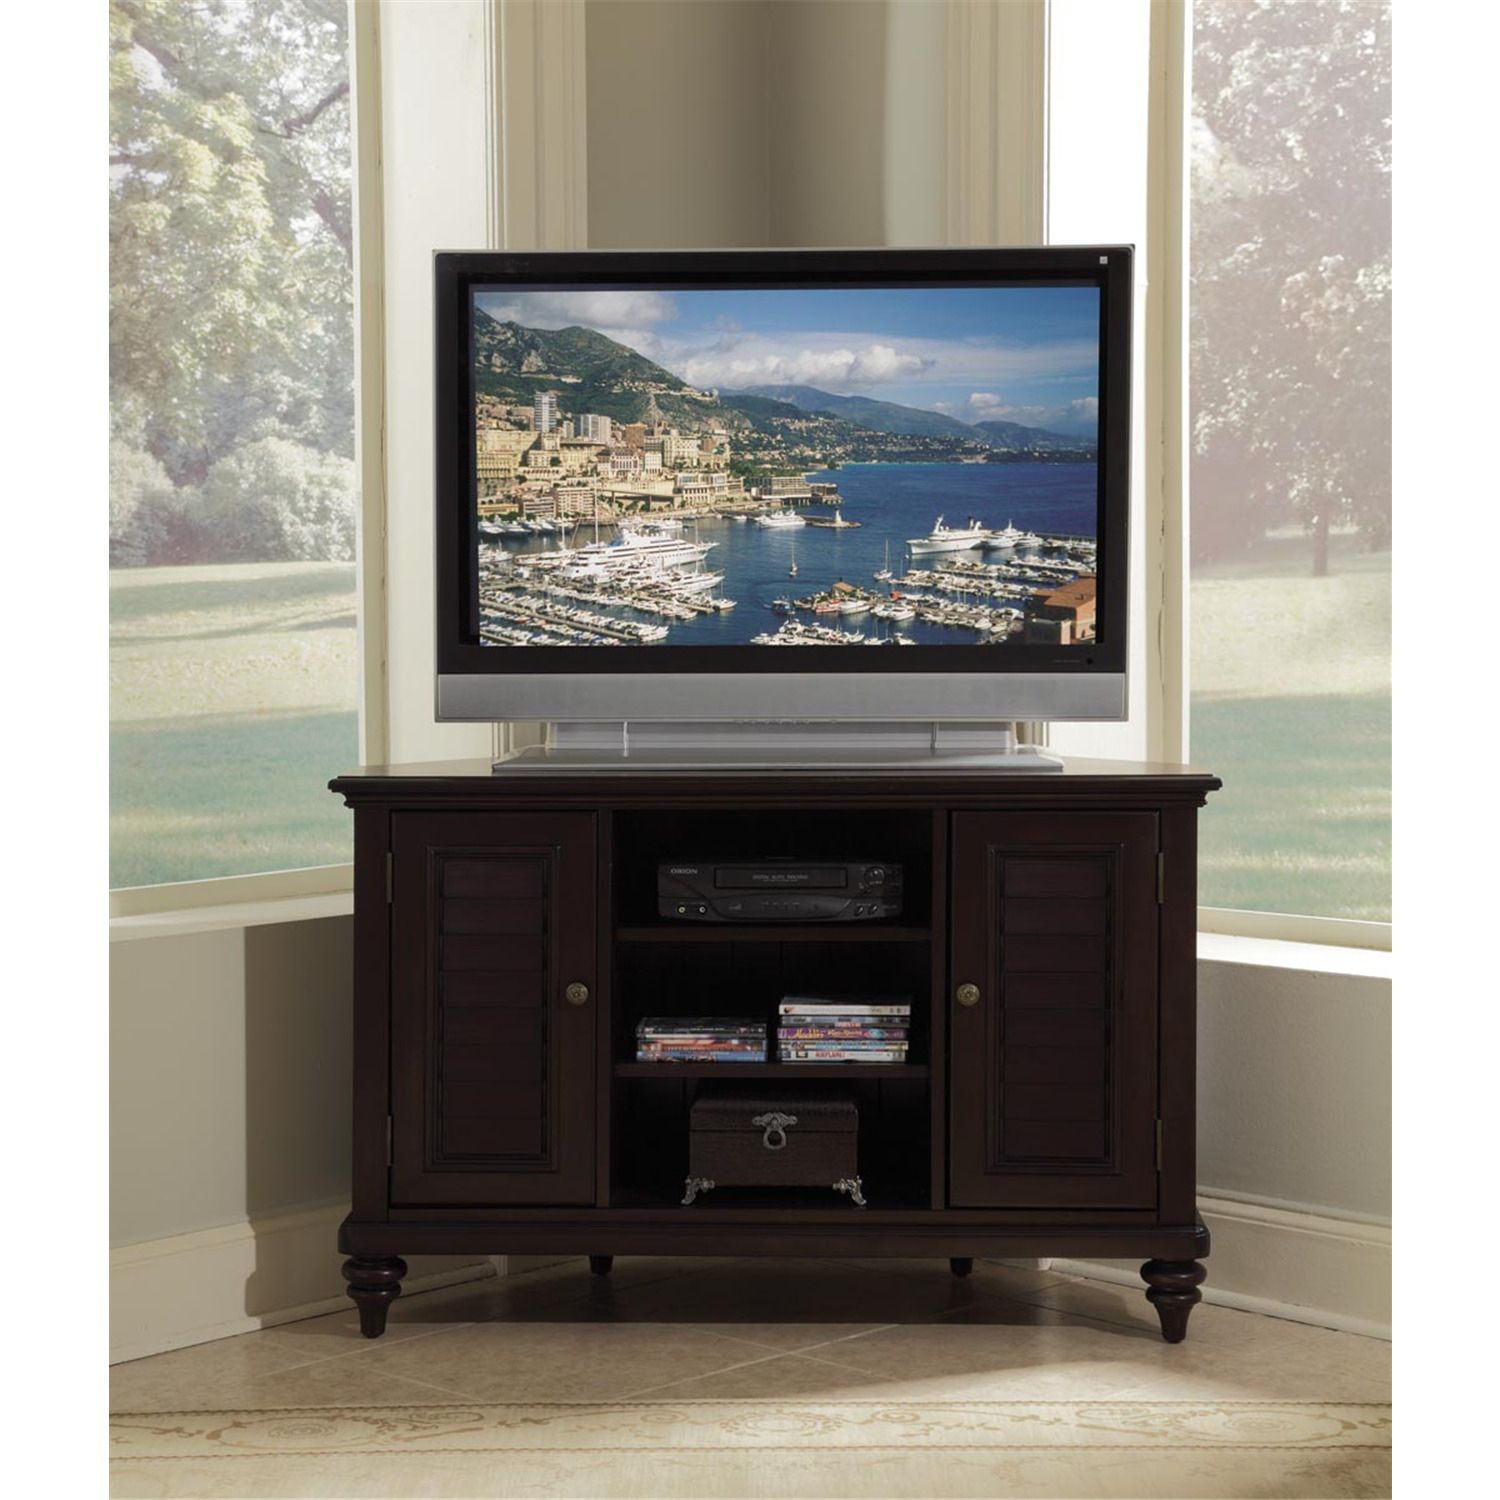 Furniture, Home Goods, Appliances, Athletic Gear, Fitness Throughout Cream Color Tv Stands (Photo 5 of 15)